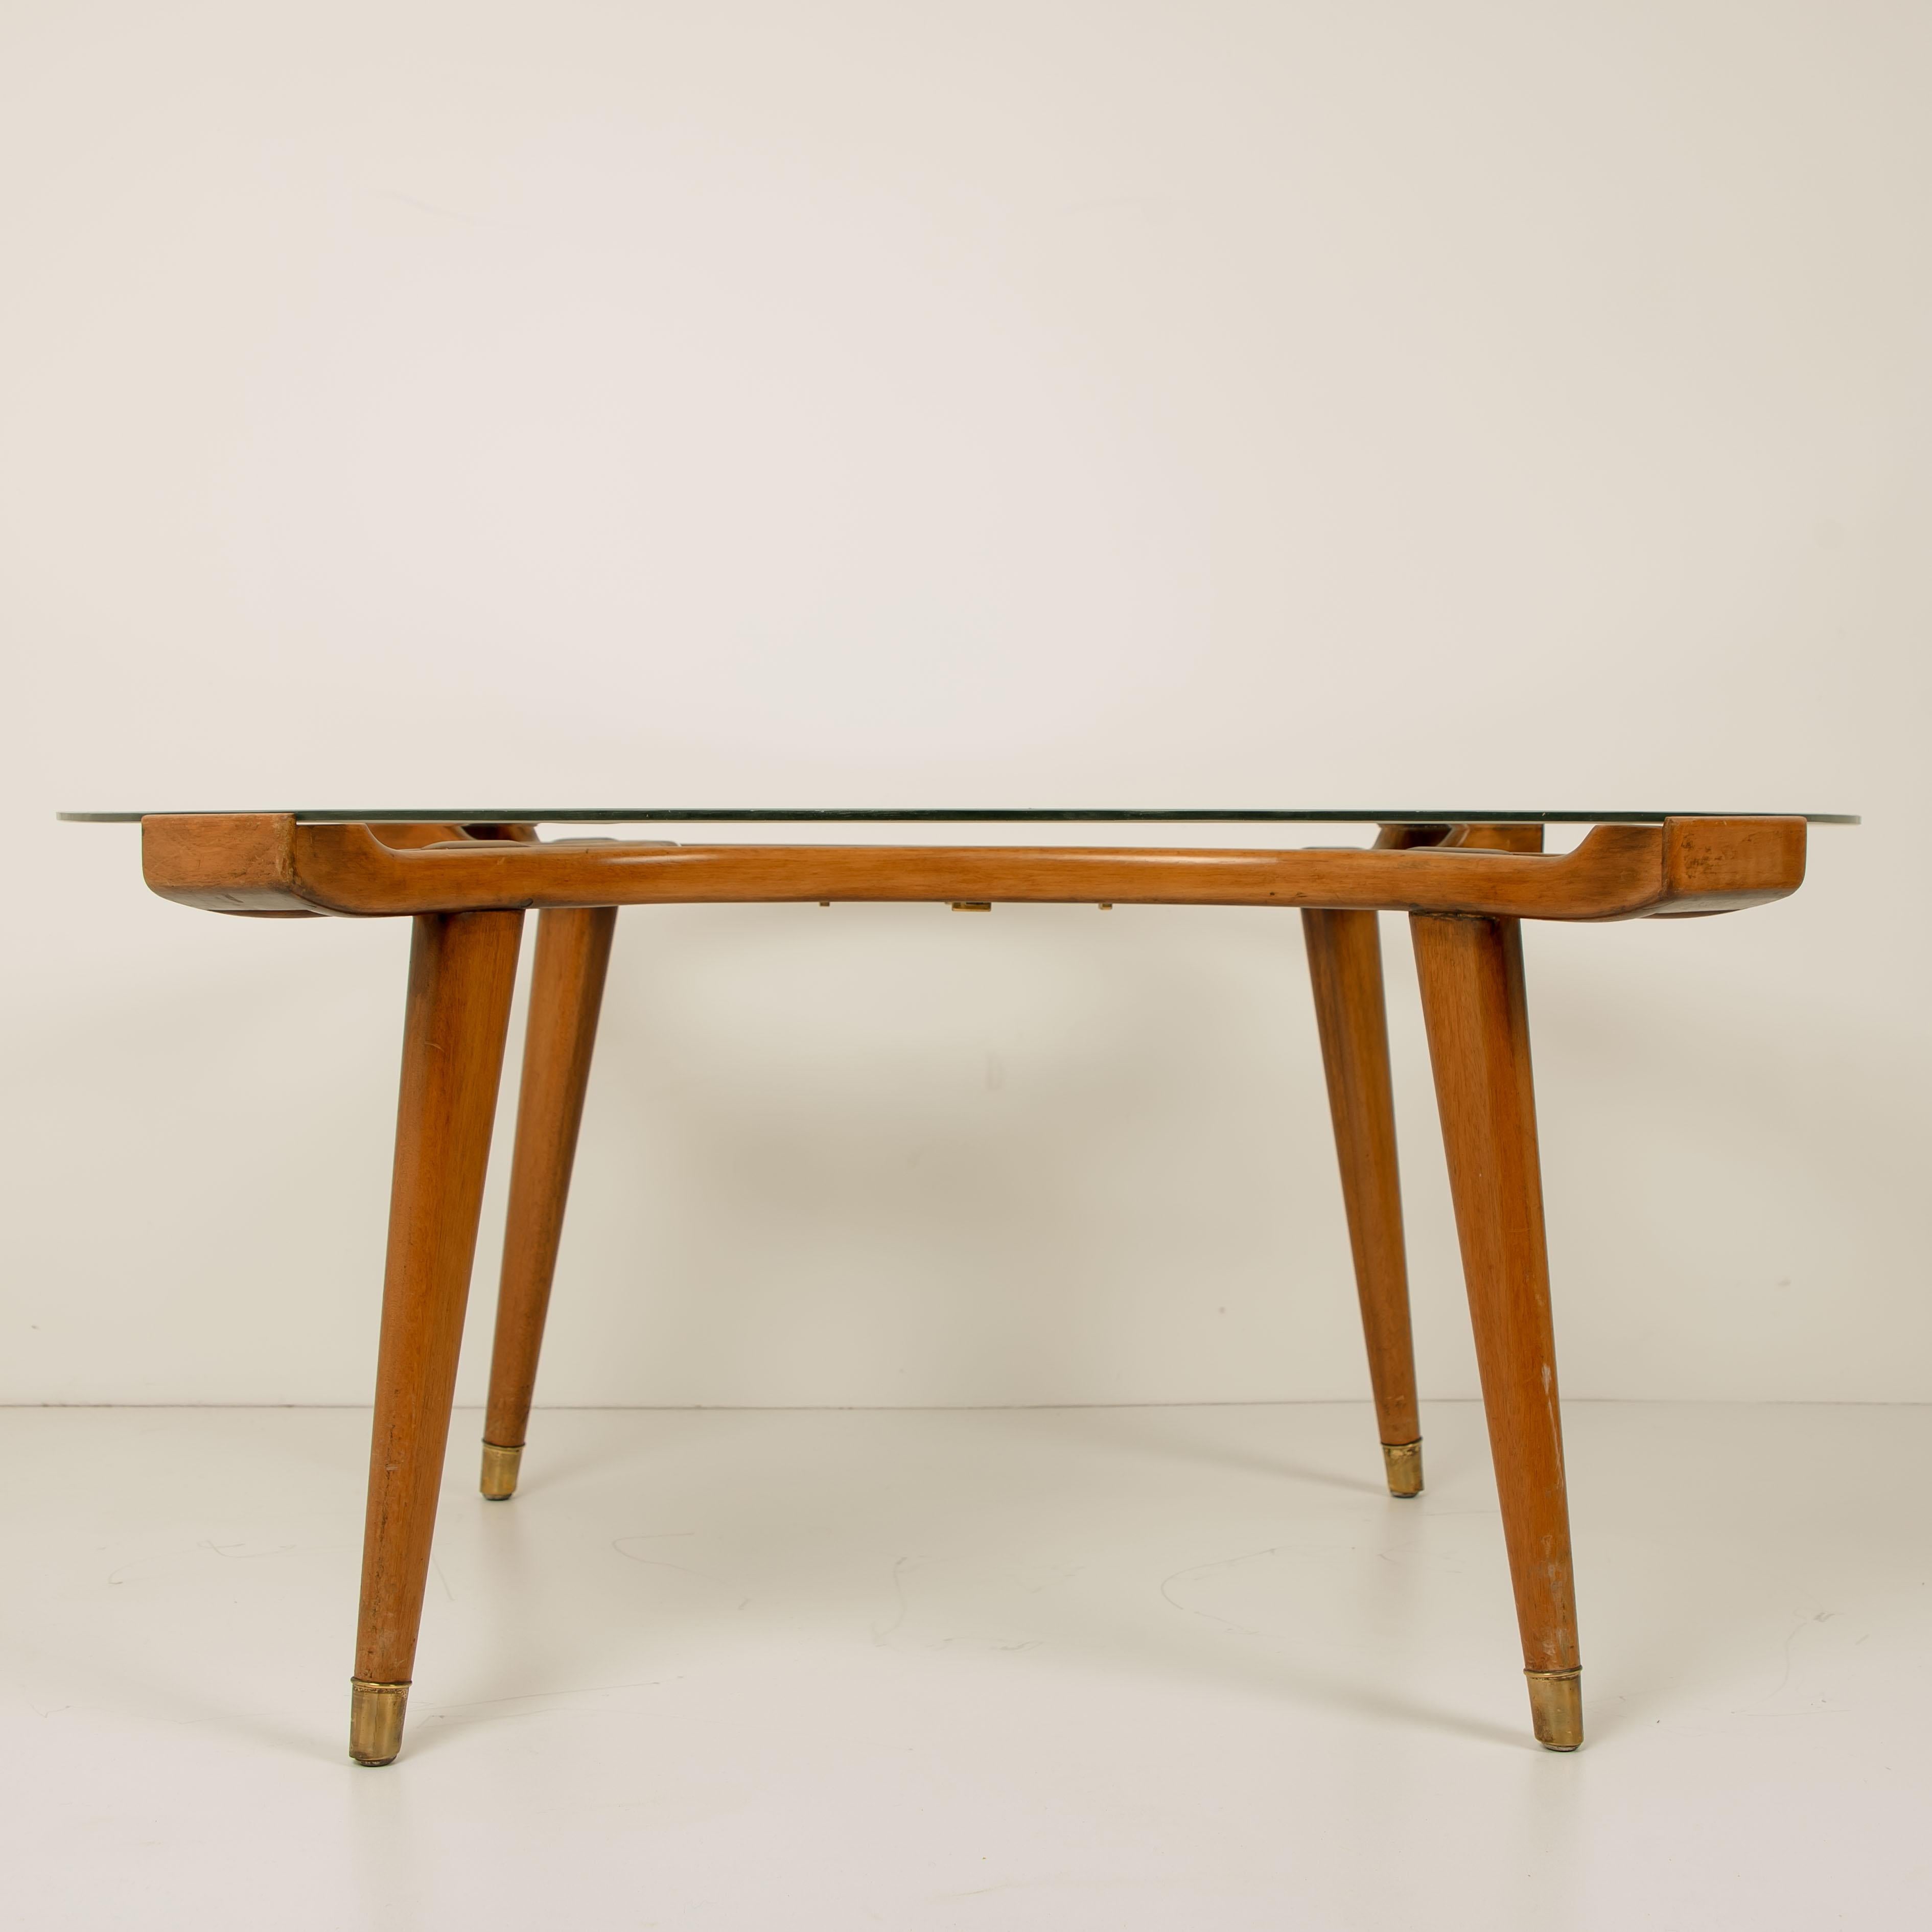 Solid Brass Walnut Glass Table, by William Watting, Produced by Fristho, 1950s For Sale 3